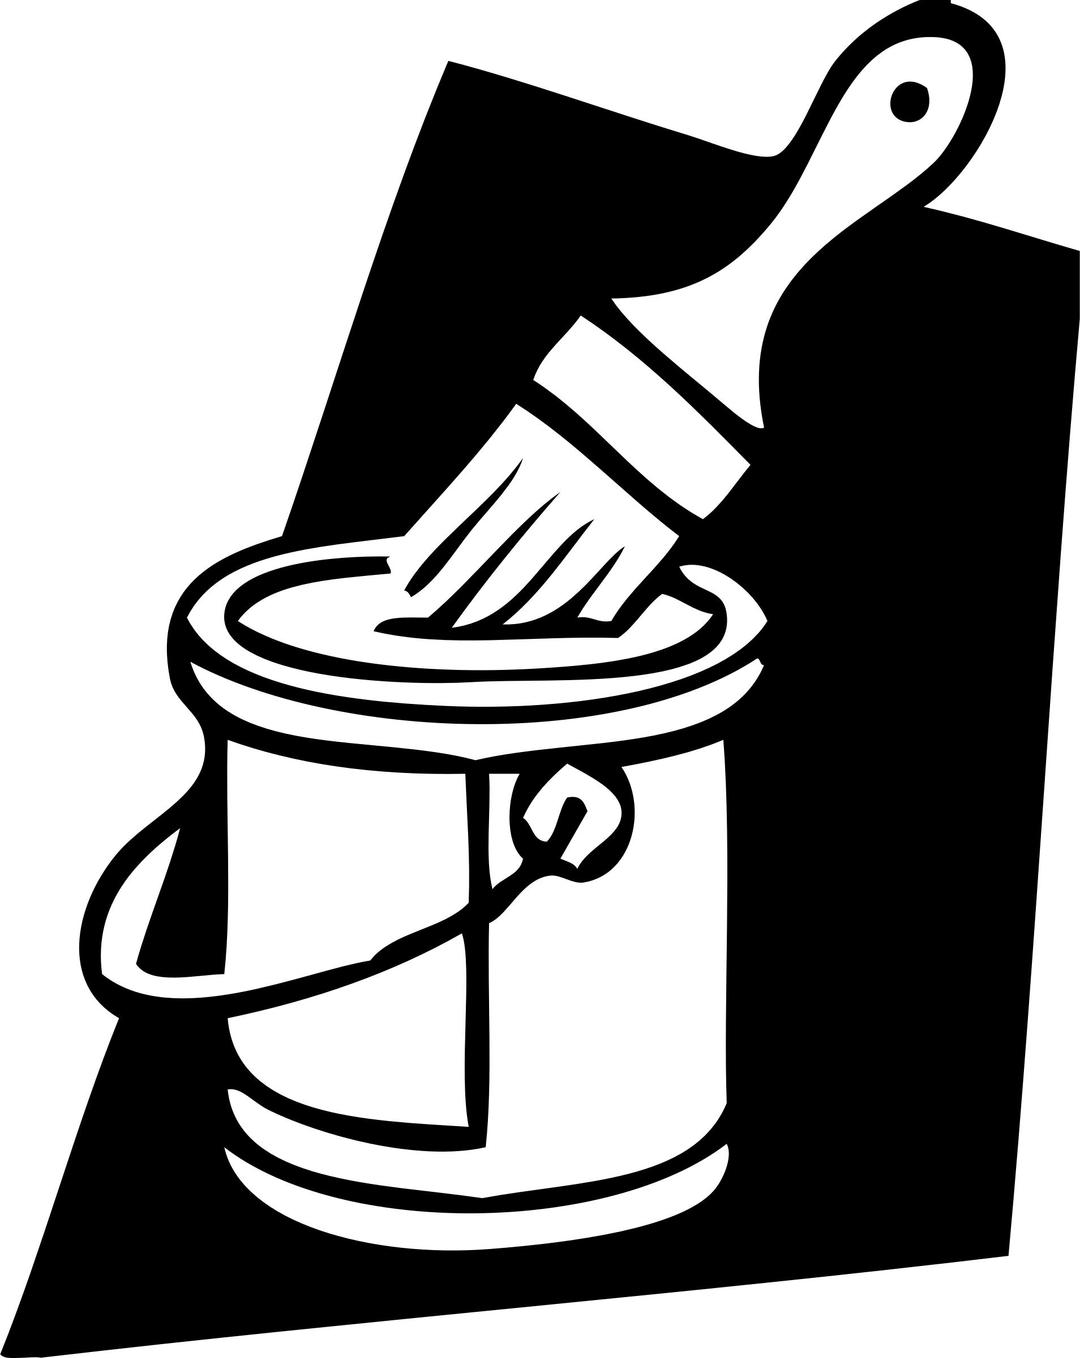 paint can and brush png transparent